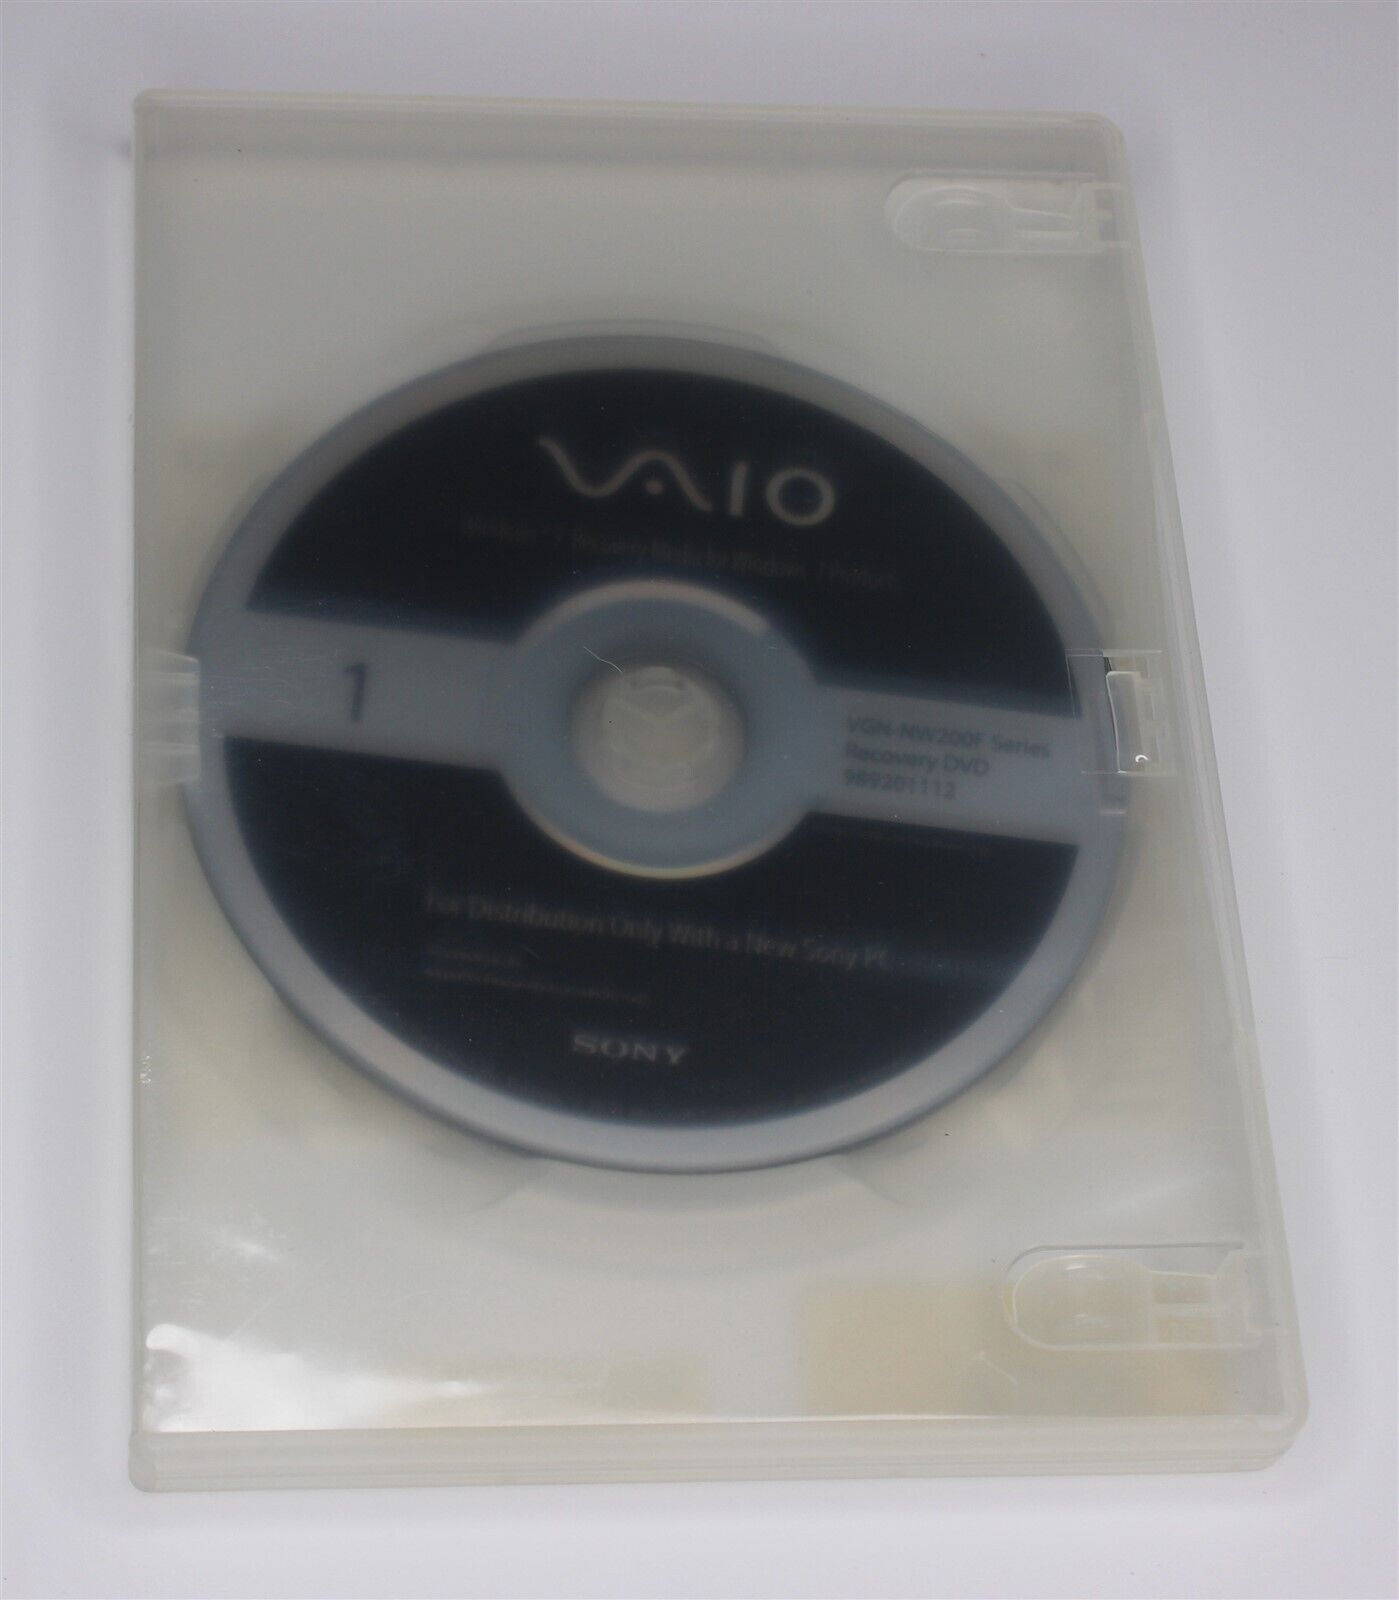 Sony Vaio Laptop Computer Recovery Discs VGN-200F Series Win 7 - 2 DVDs